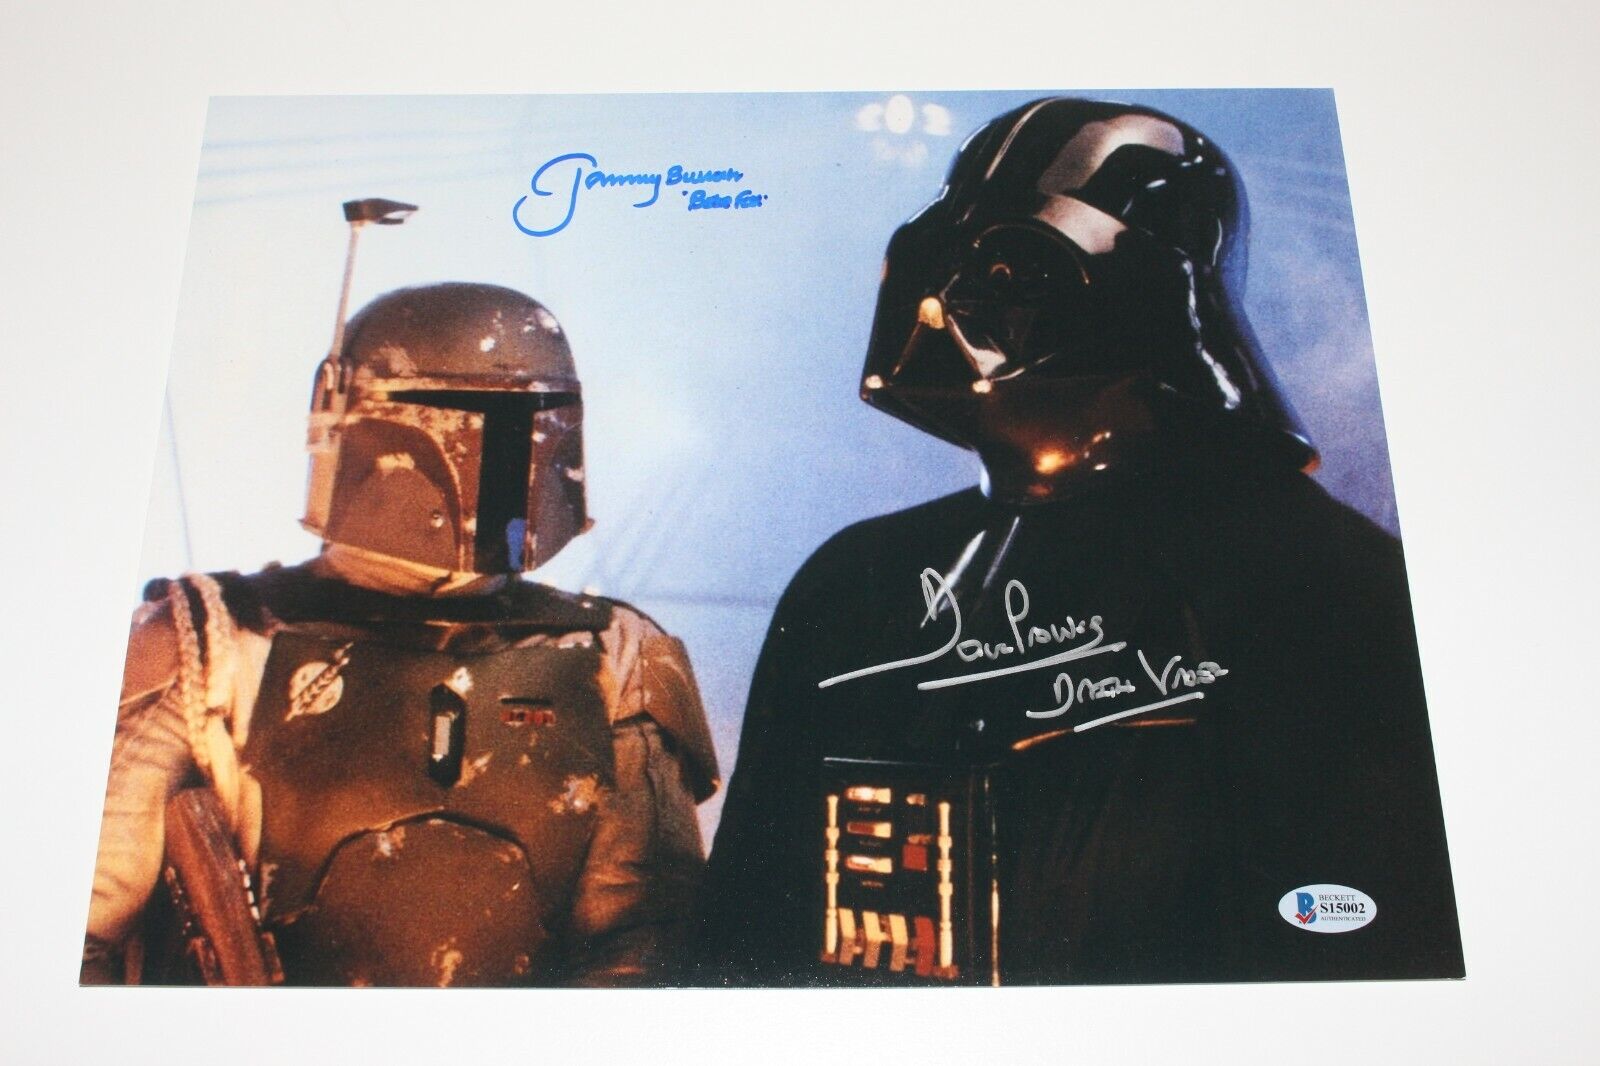 JEREMY BULLOCH DAVE PROWSE SIGNED STAR WARS 11x14 Photo Poster painting BECKETT COA DARTH VADER